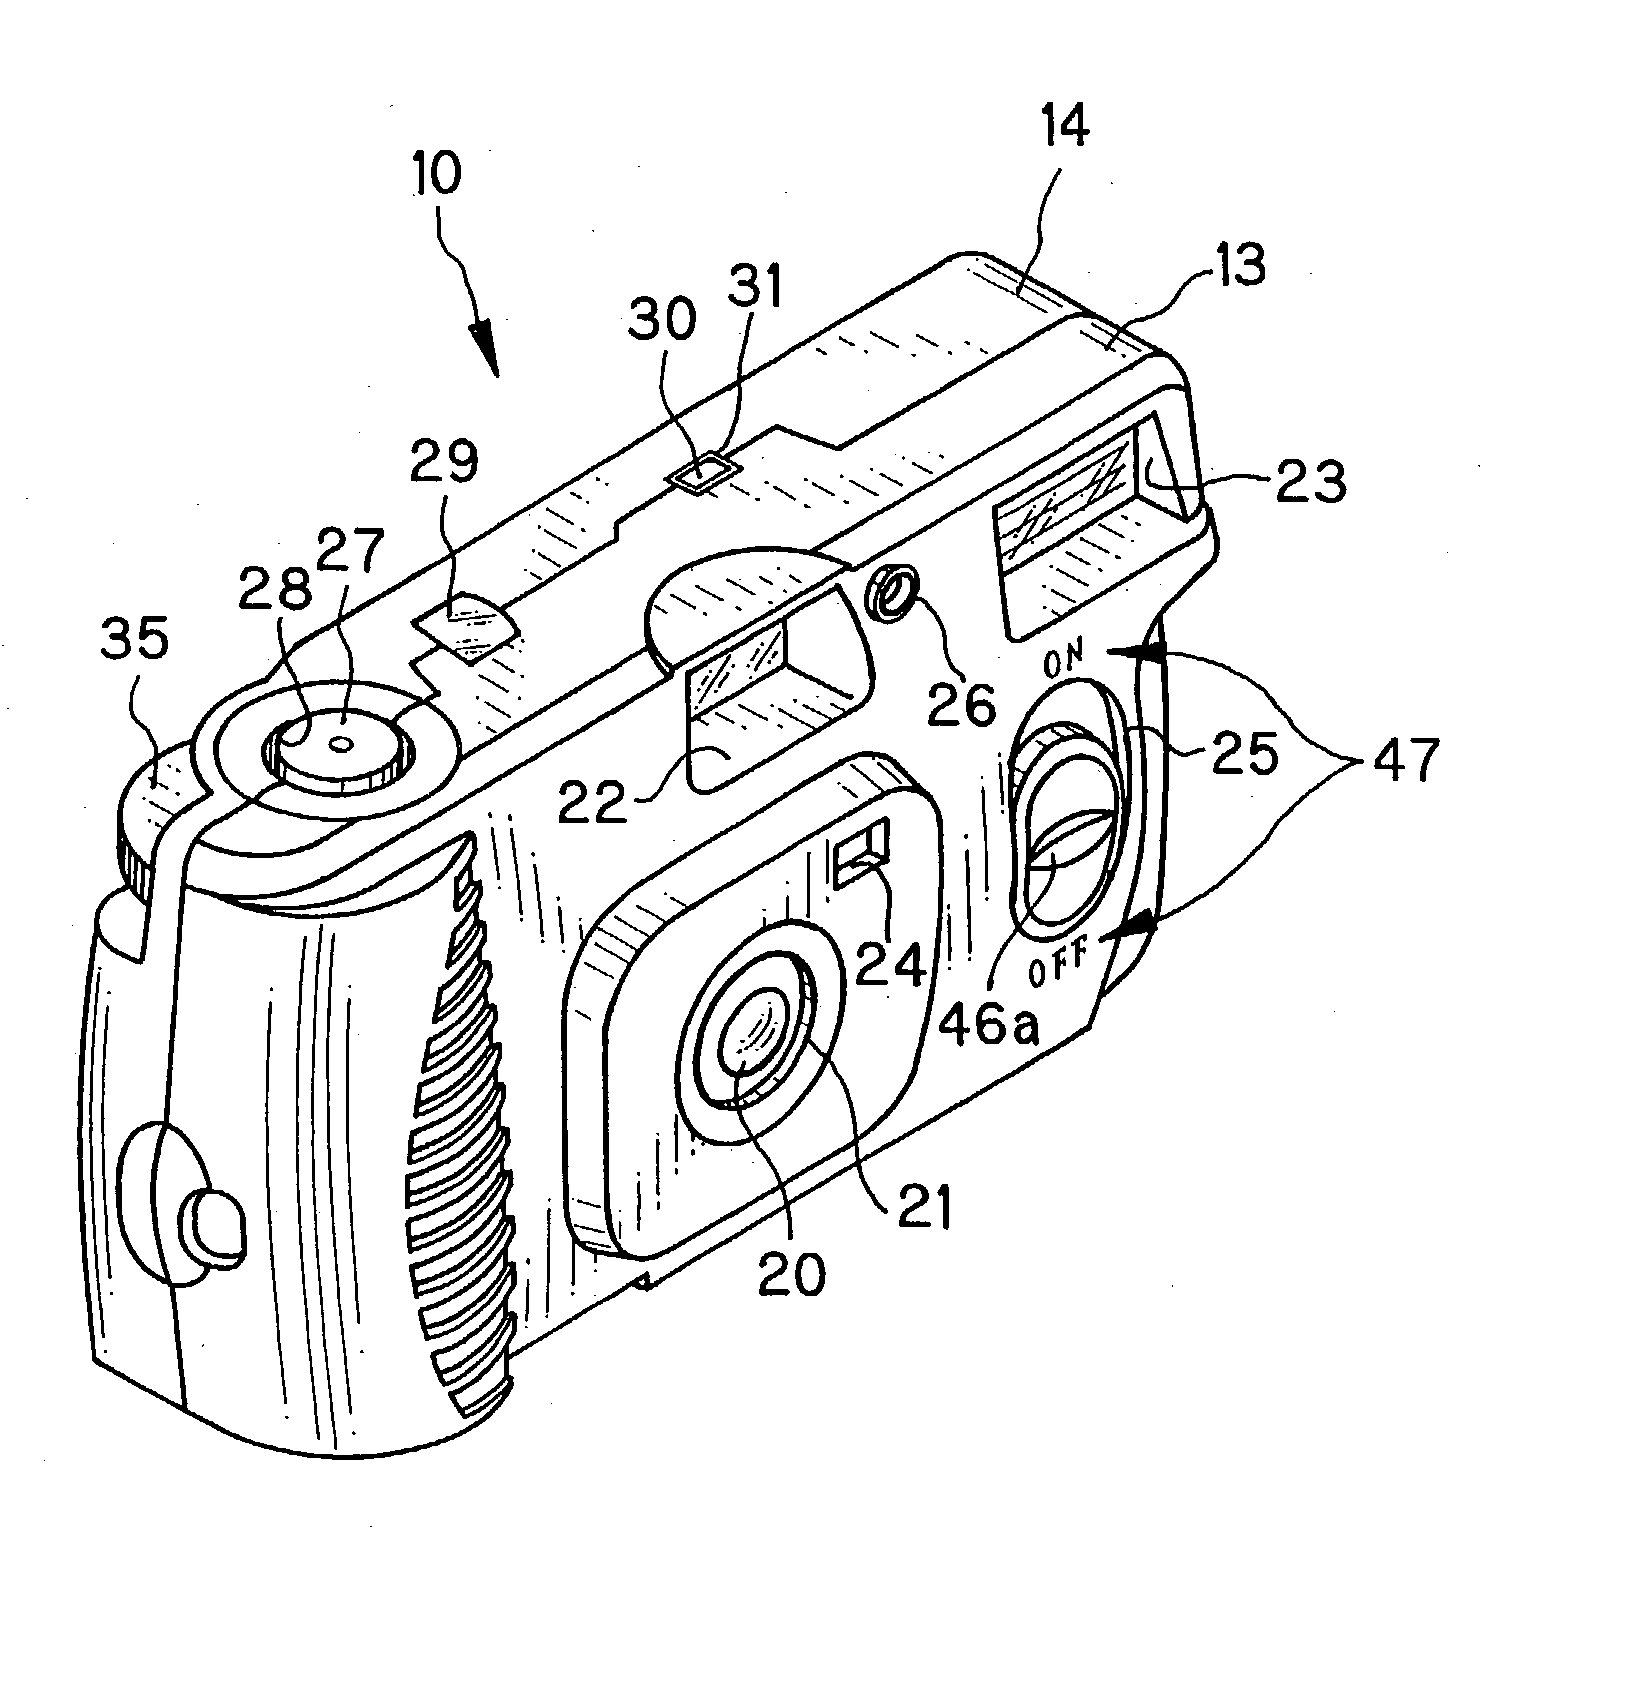 Camera and shutter device